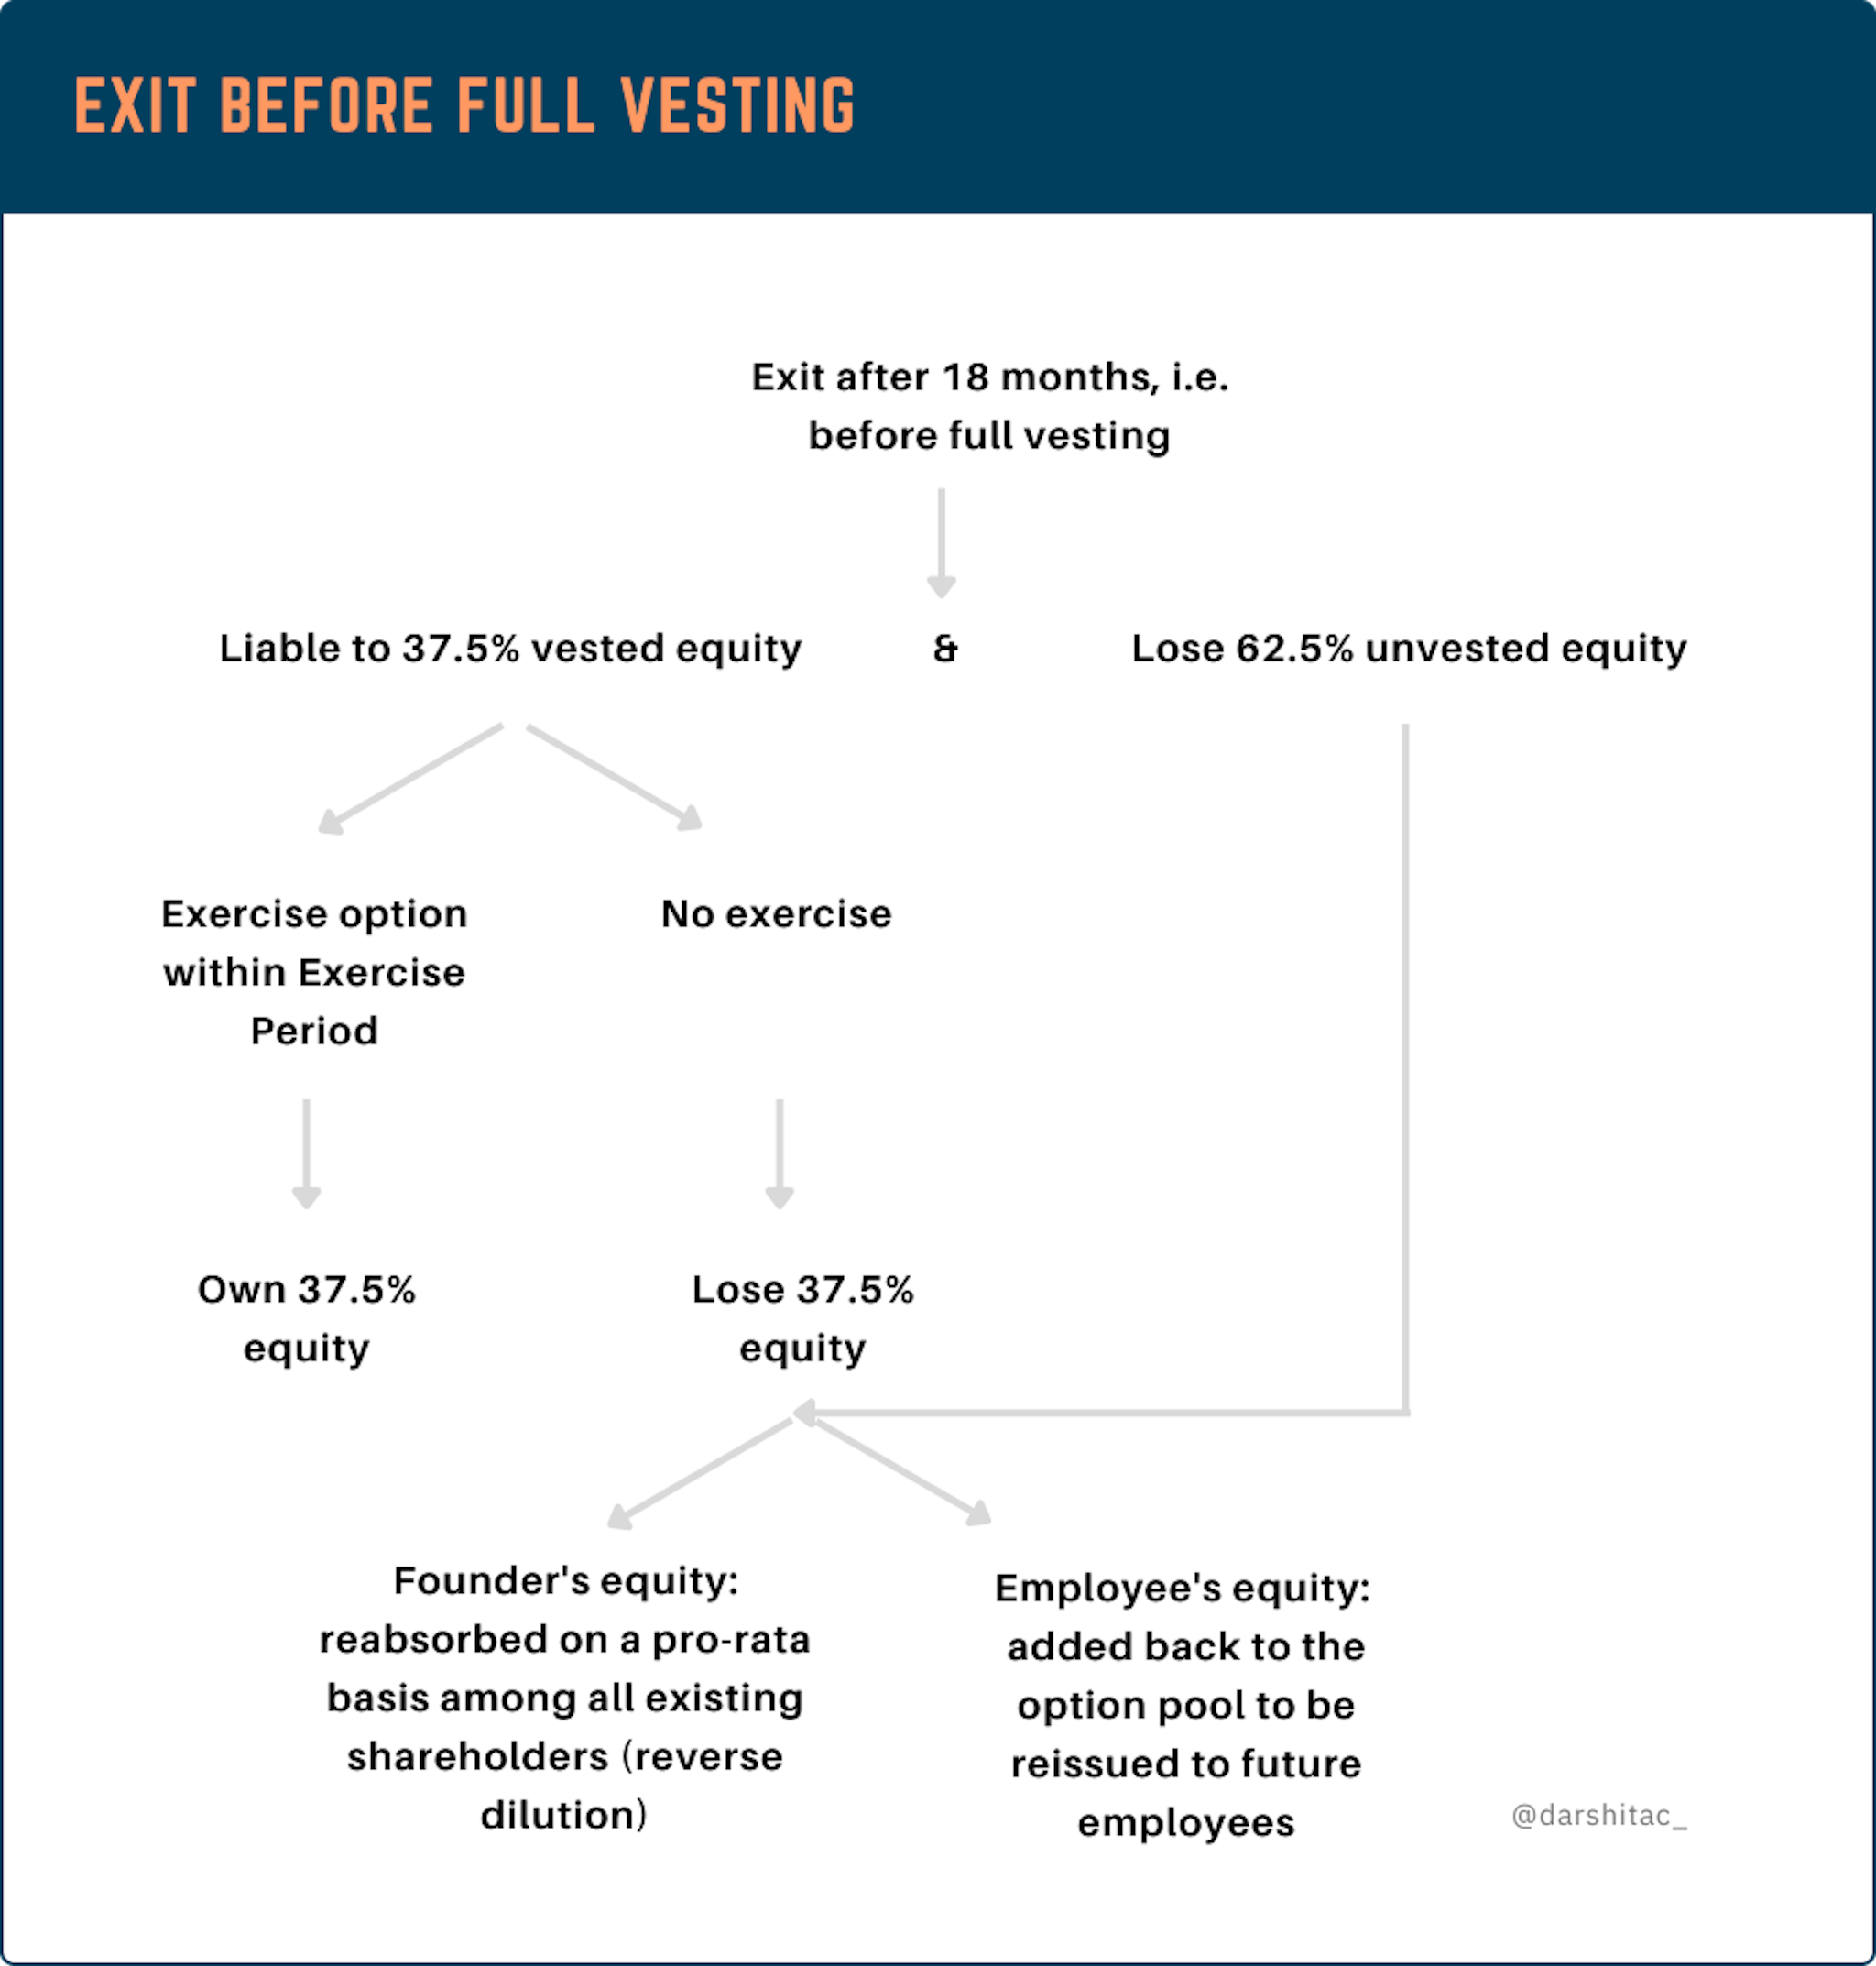 Exit before vesting is complete